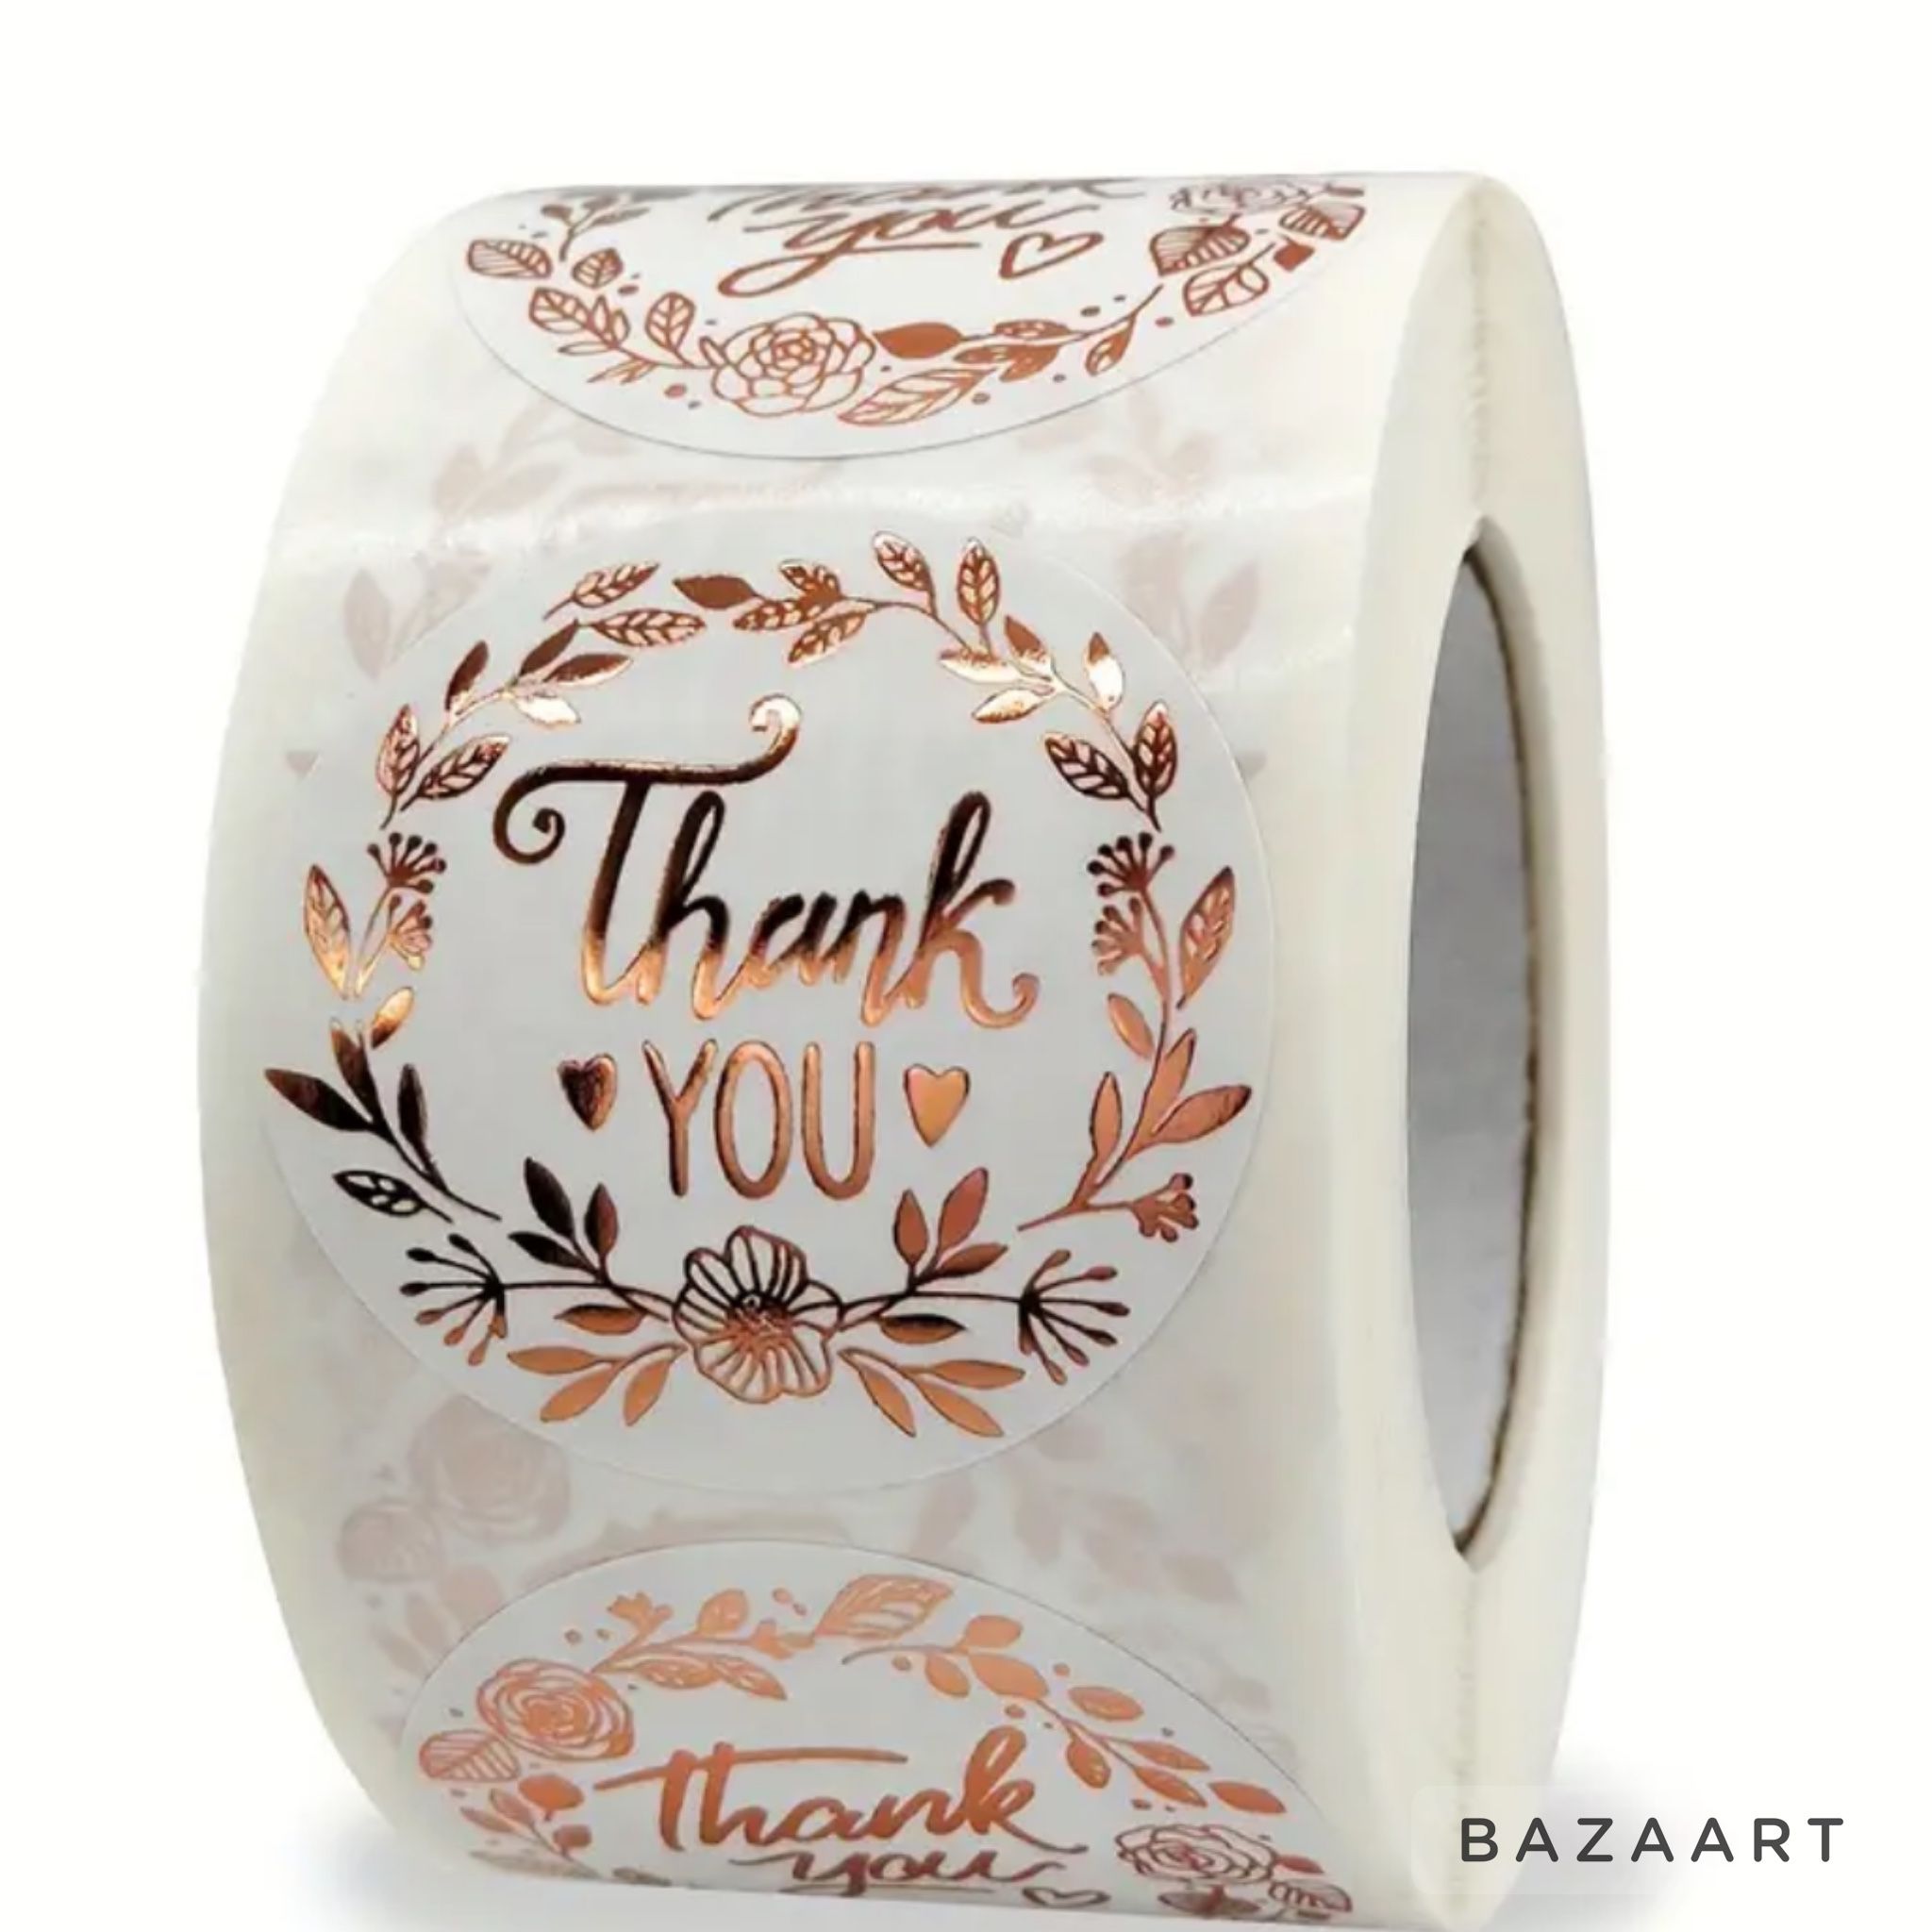 500pcs/roll Thank You floral Rose Gold Self-adhesive Sticker Label 1.5”